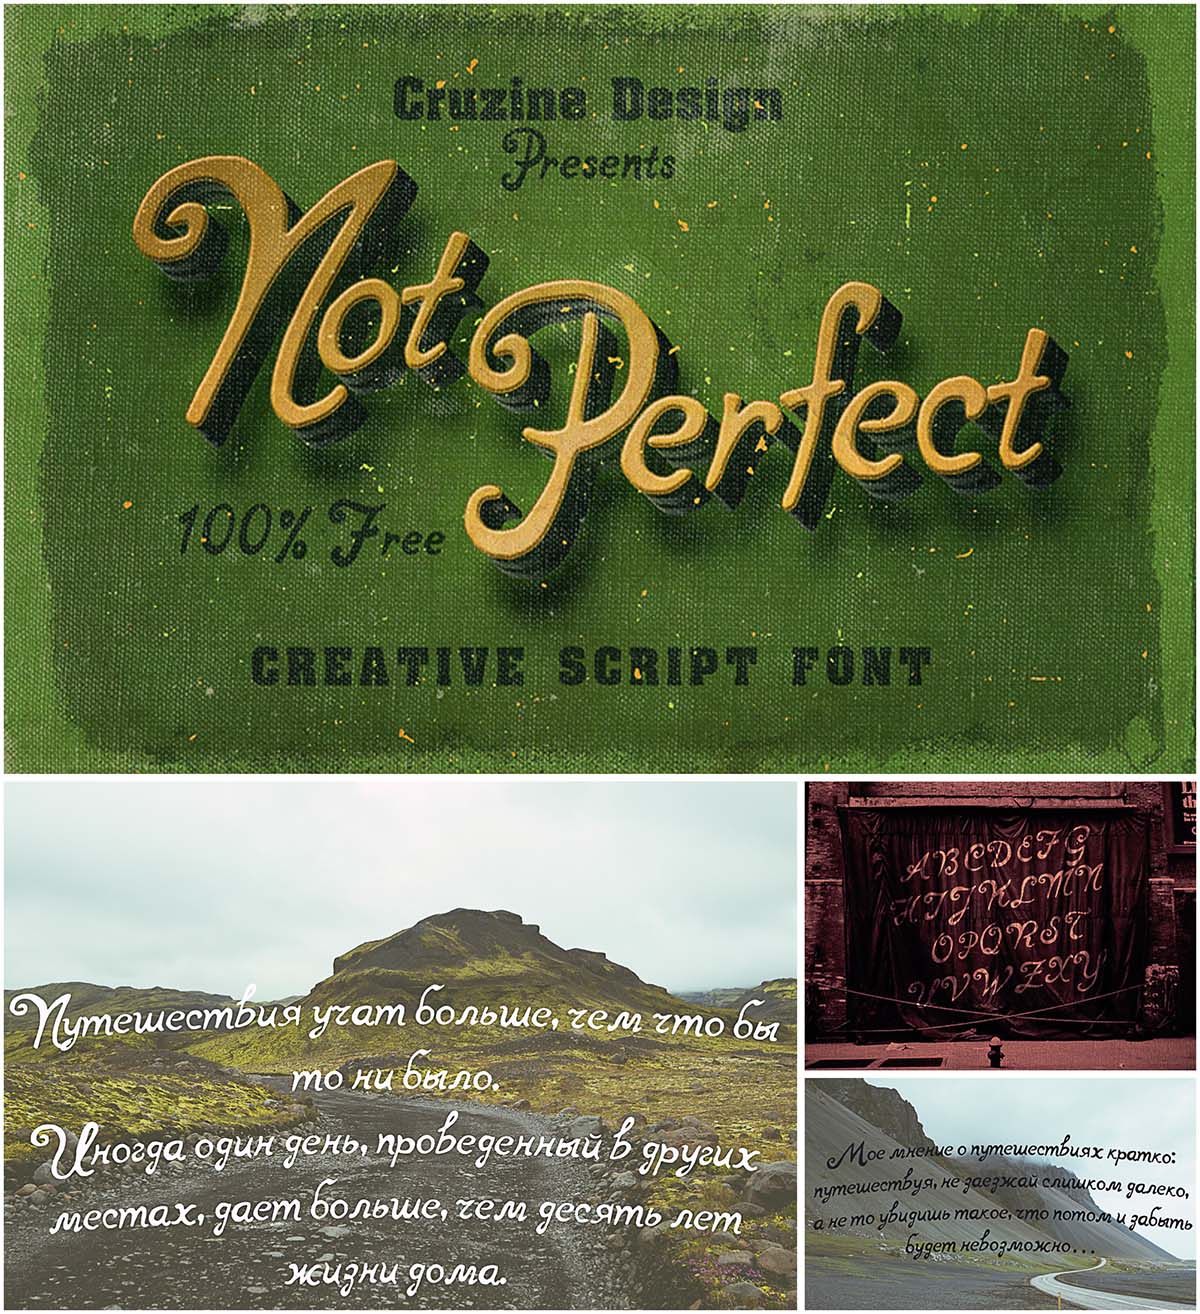 Notperfect script font with cyrillic typeface